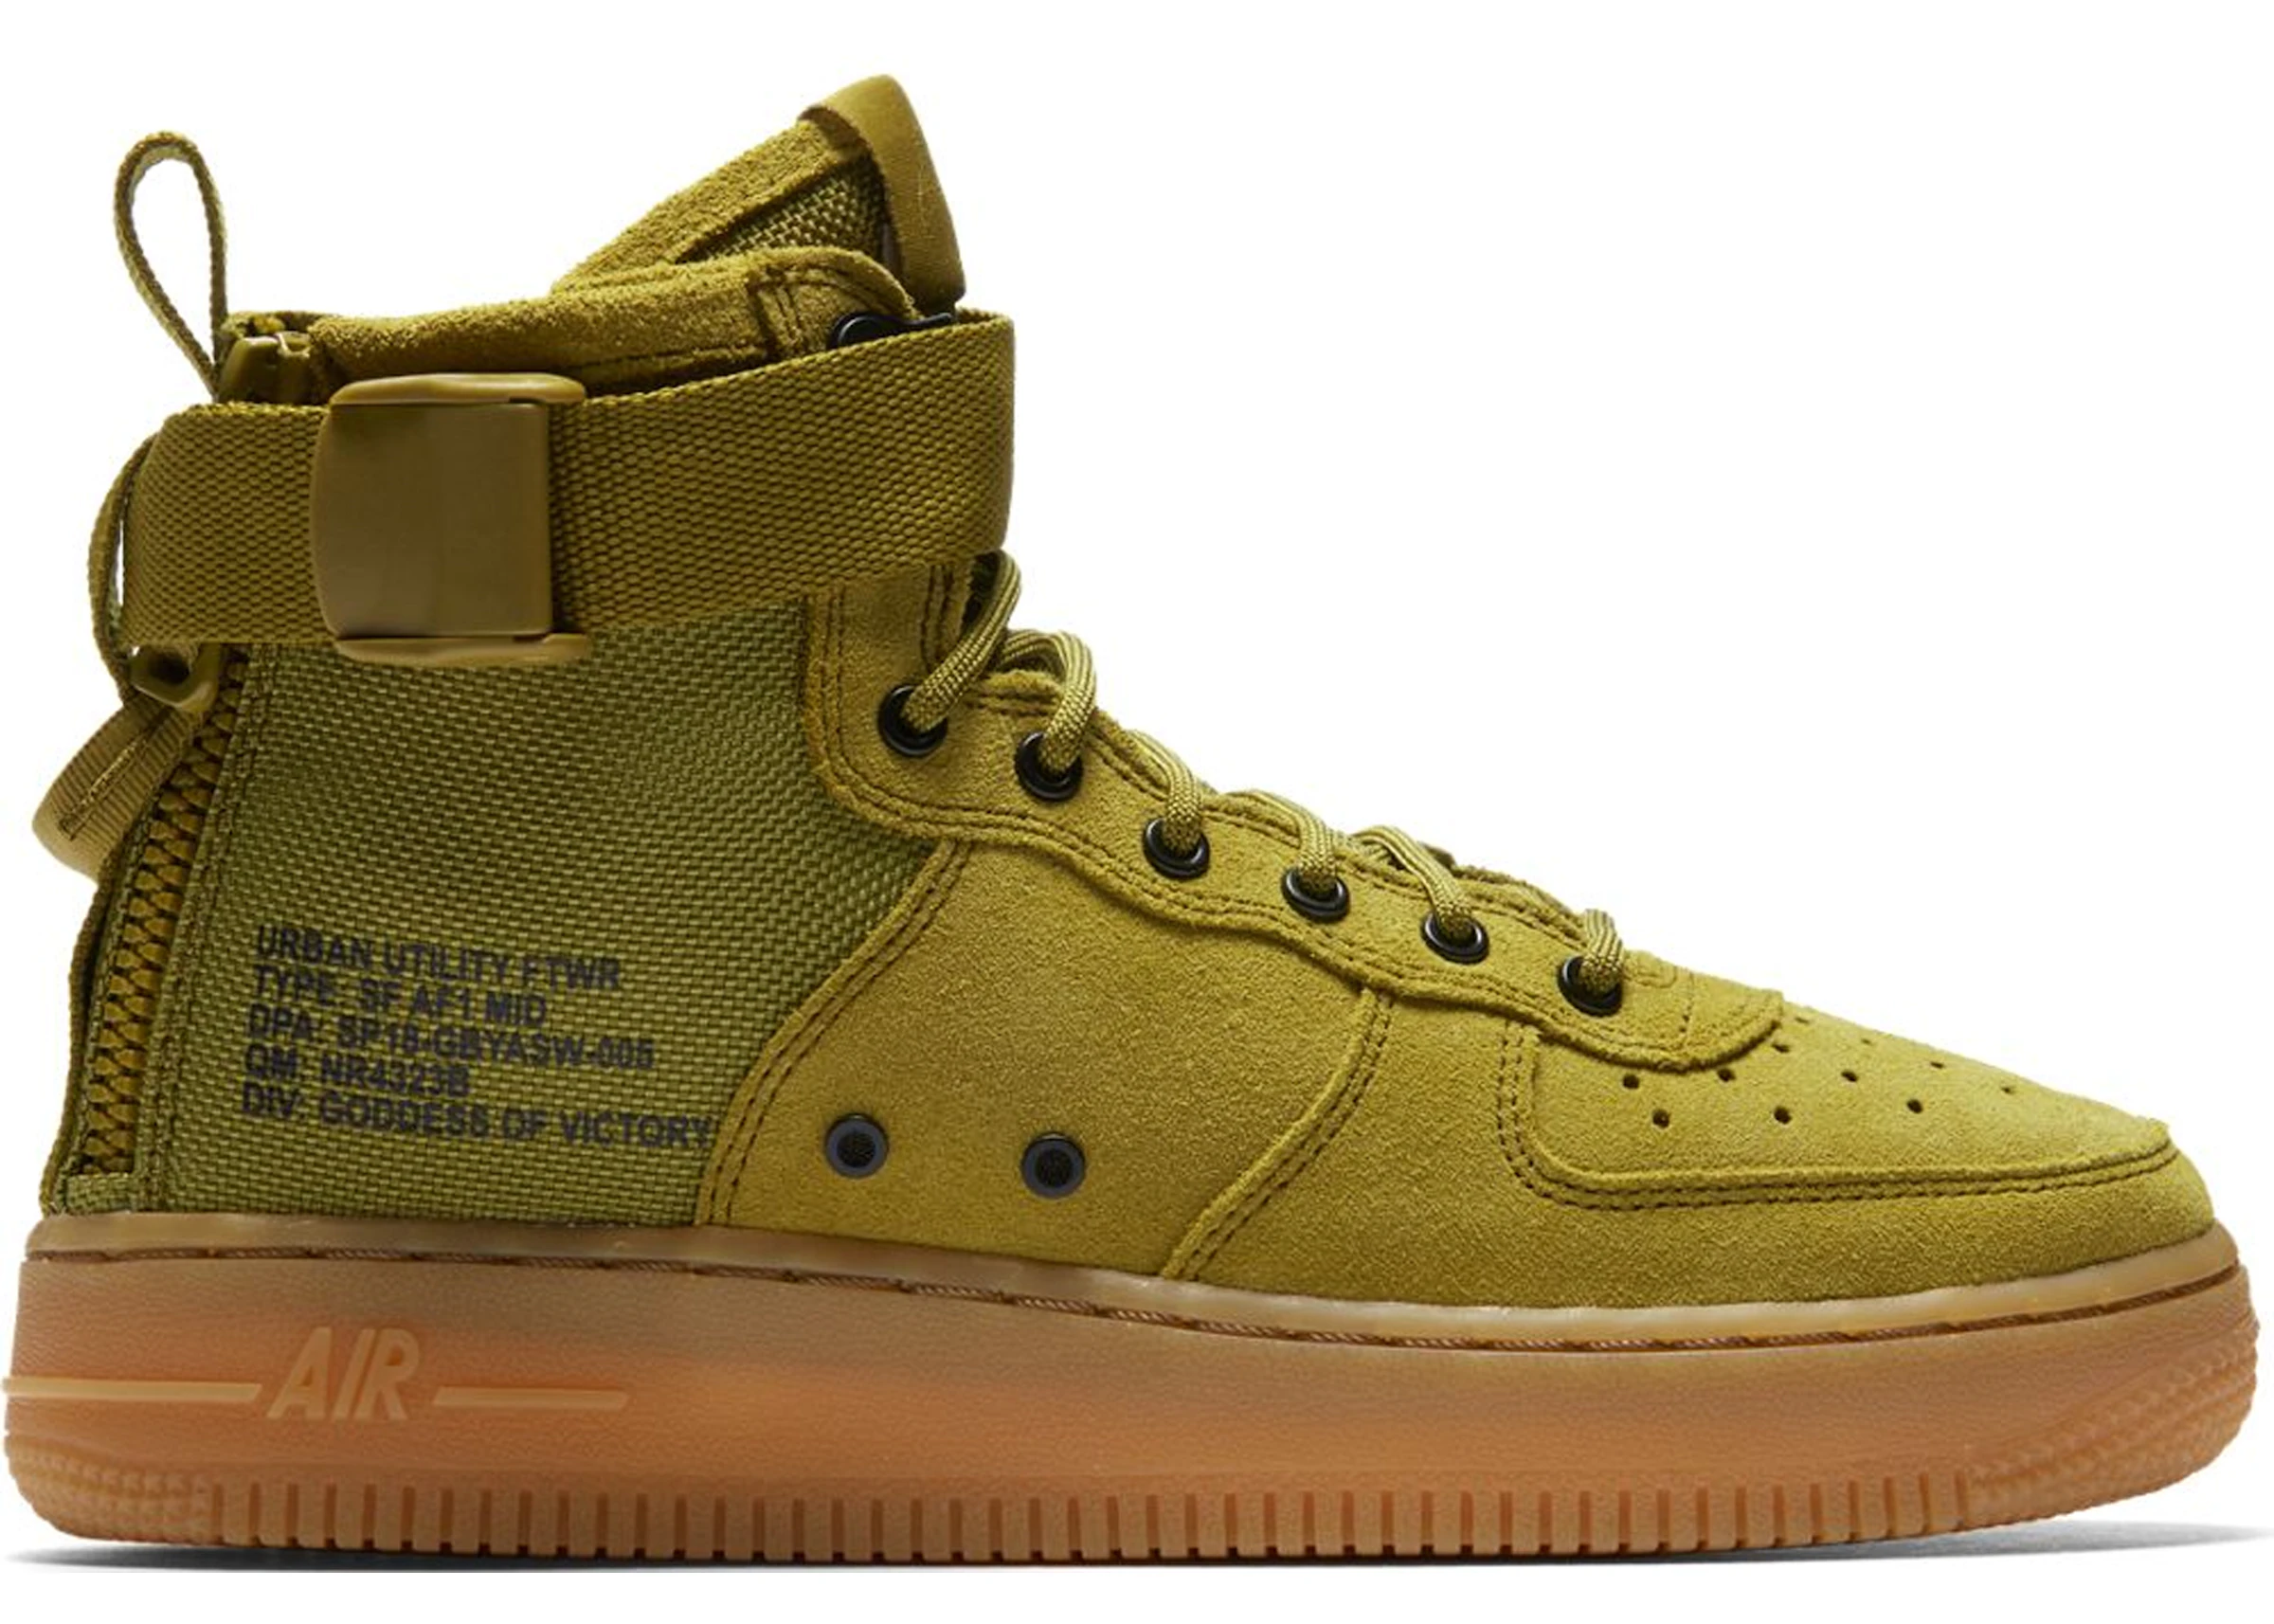 Exclusive Represent Voltage Nike SF Air Force 1 Mid Desert Moss (GS) - AJ0424-300 - US